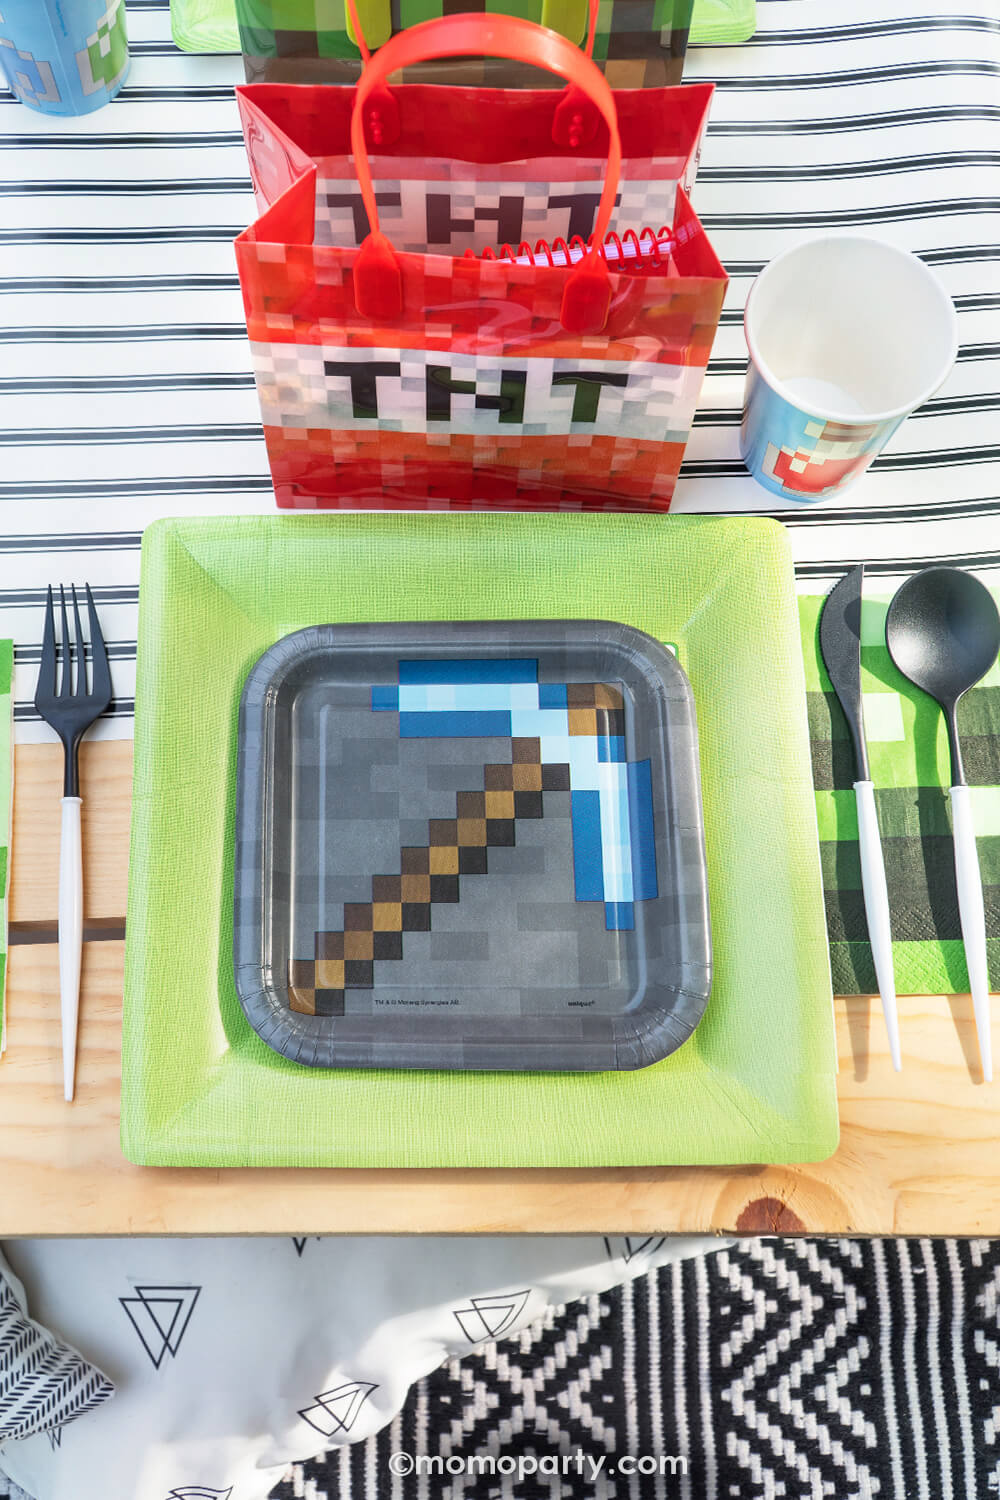 Minecraft themed Birthday Party Ideas by Momo Party. Featuring Minecraft gray side plate layered with modern sophisticated large lime green dinner plates, blue Minecraft potion paper cups, beautiful black and white cutlery sets, an pixel TNT theme goodie bags, all on the black striped table runner of the kids picnic table. These party supplies are perfect for modern kid's minecraft birthday party.